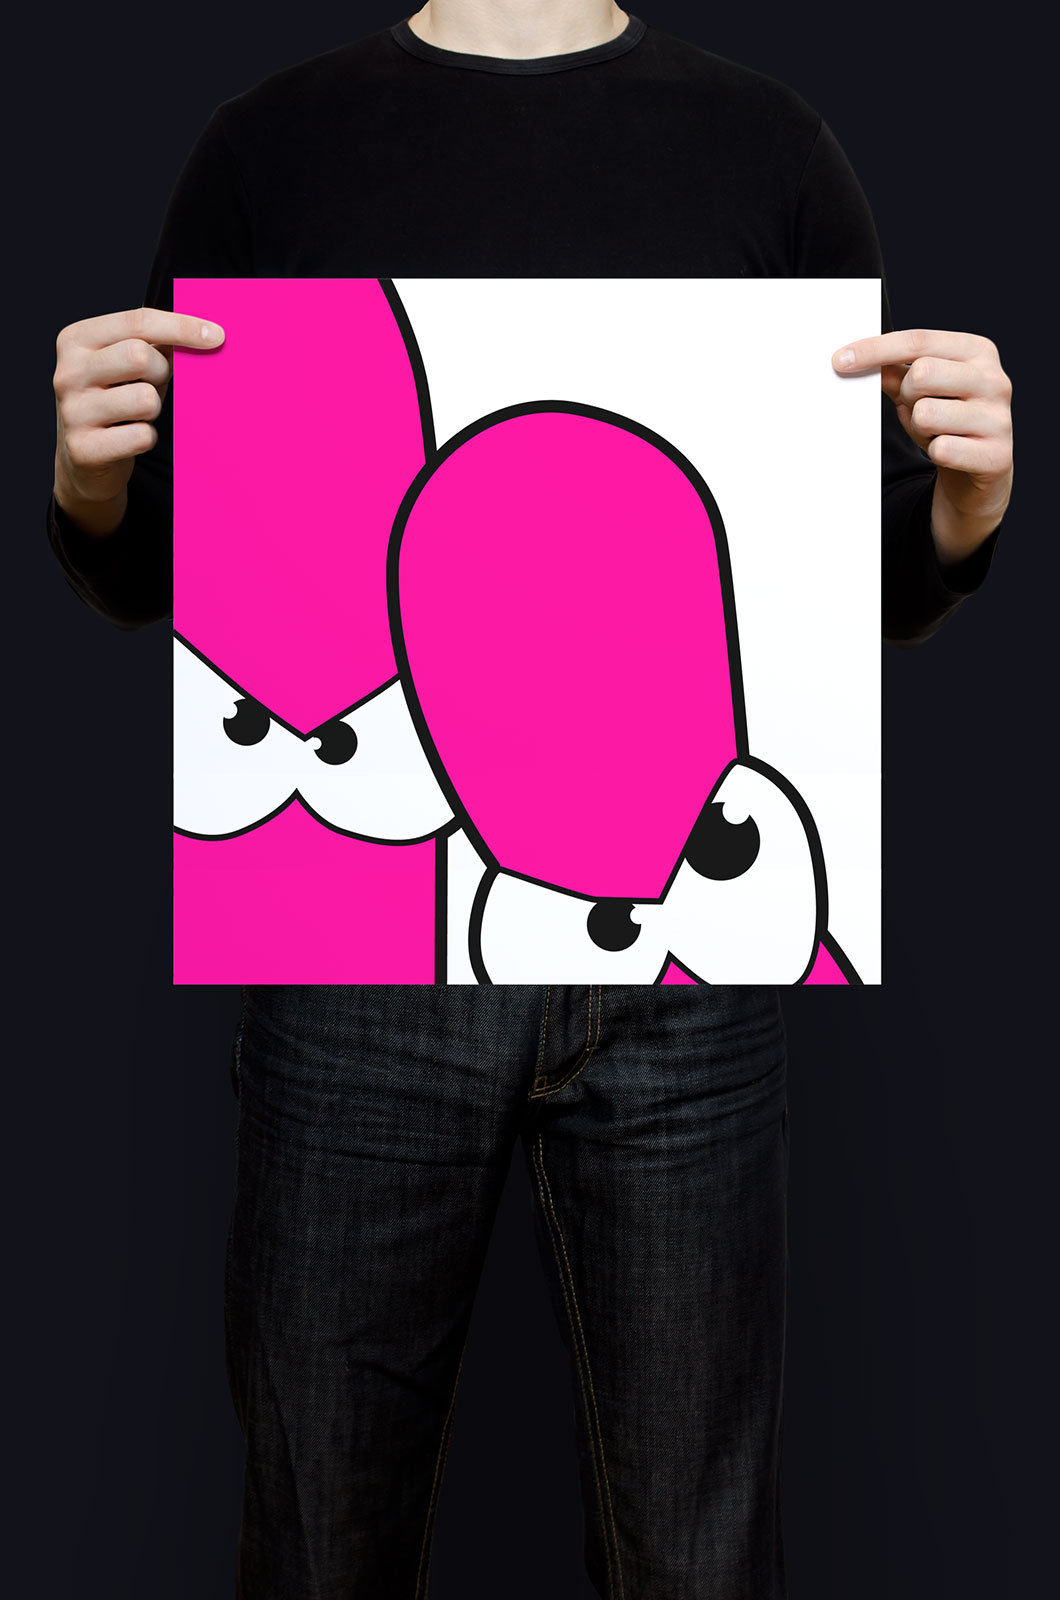 Alexander Glante - Works - The Pink Thing - 05